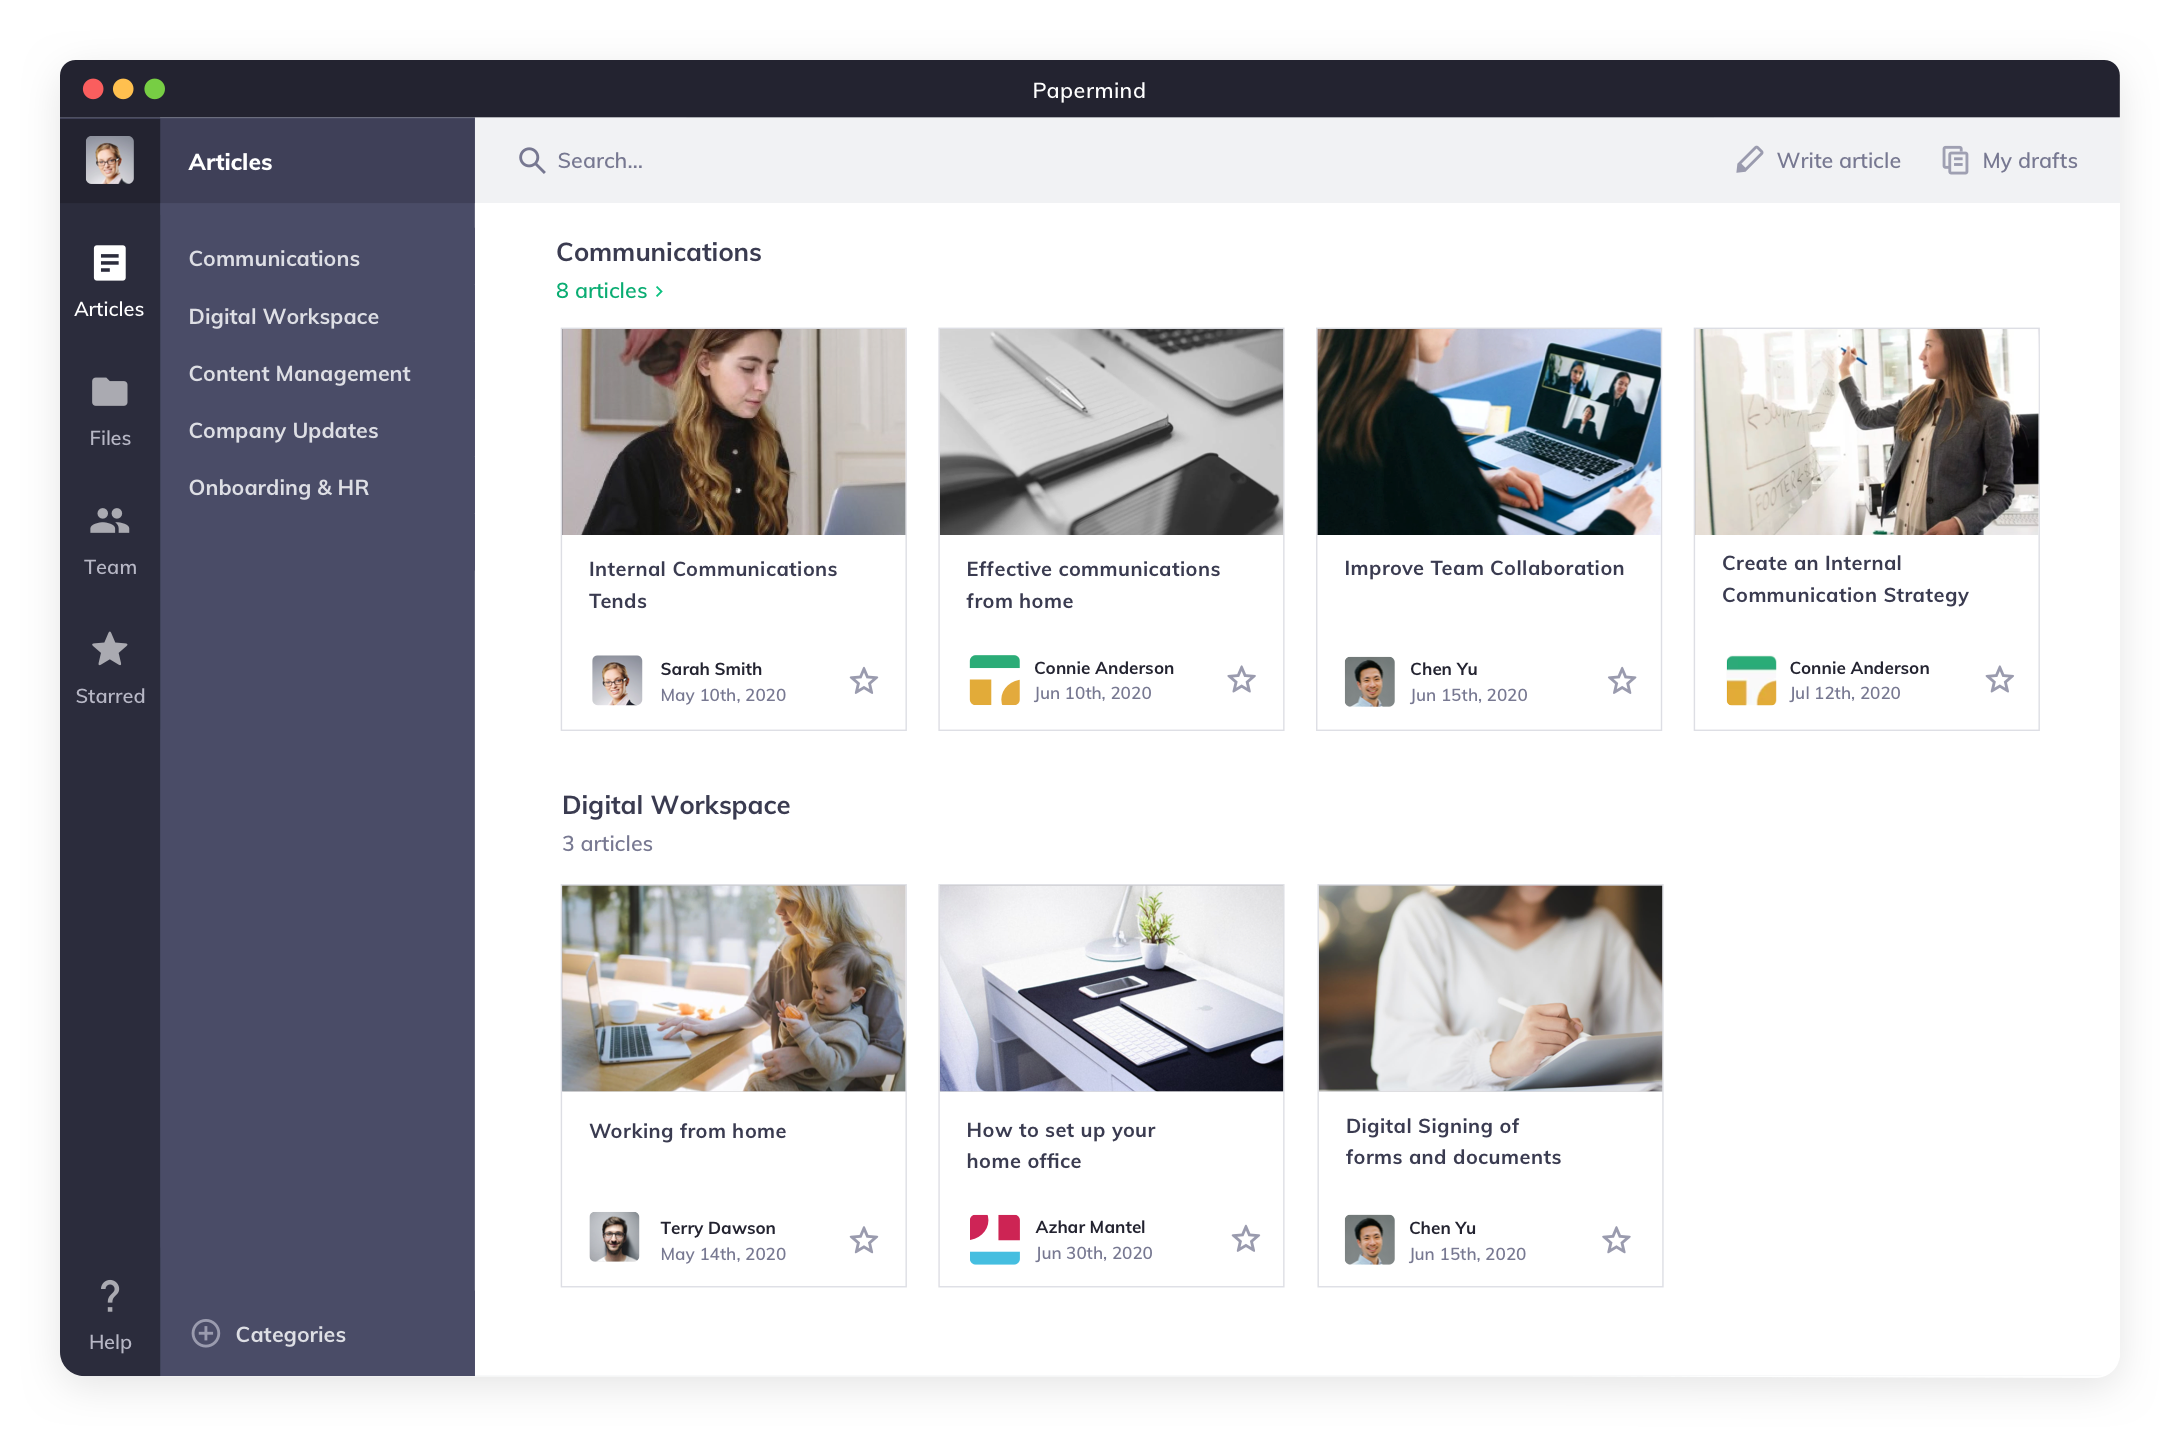 Get feedback from a vast remote working audience about Papermind